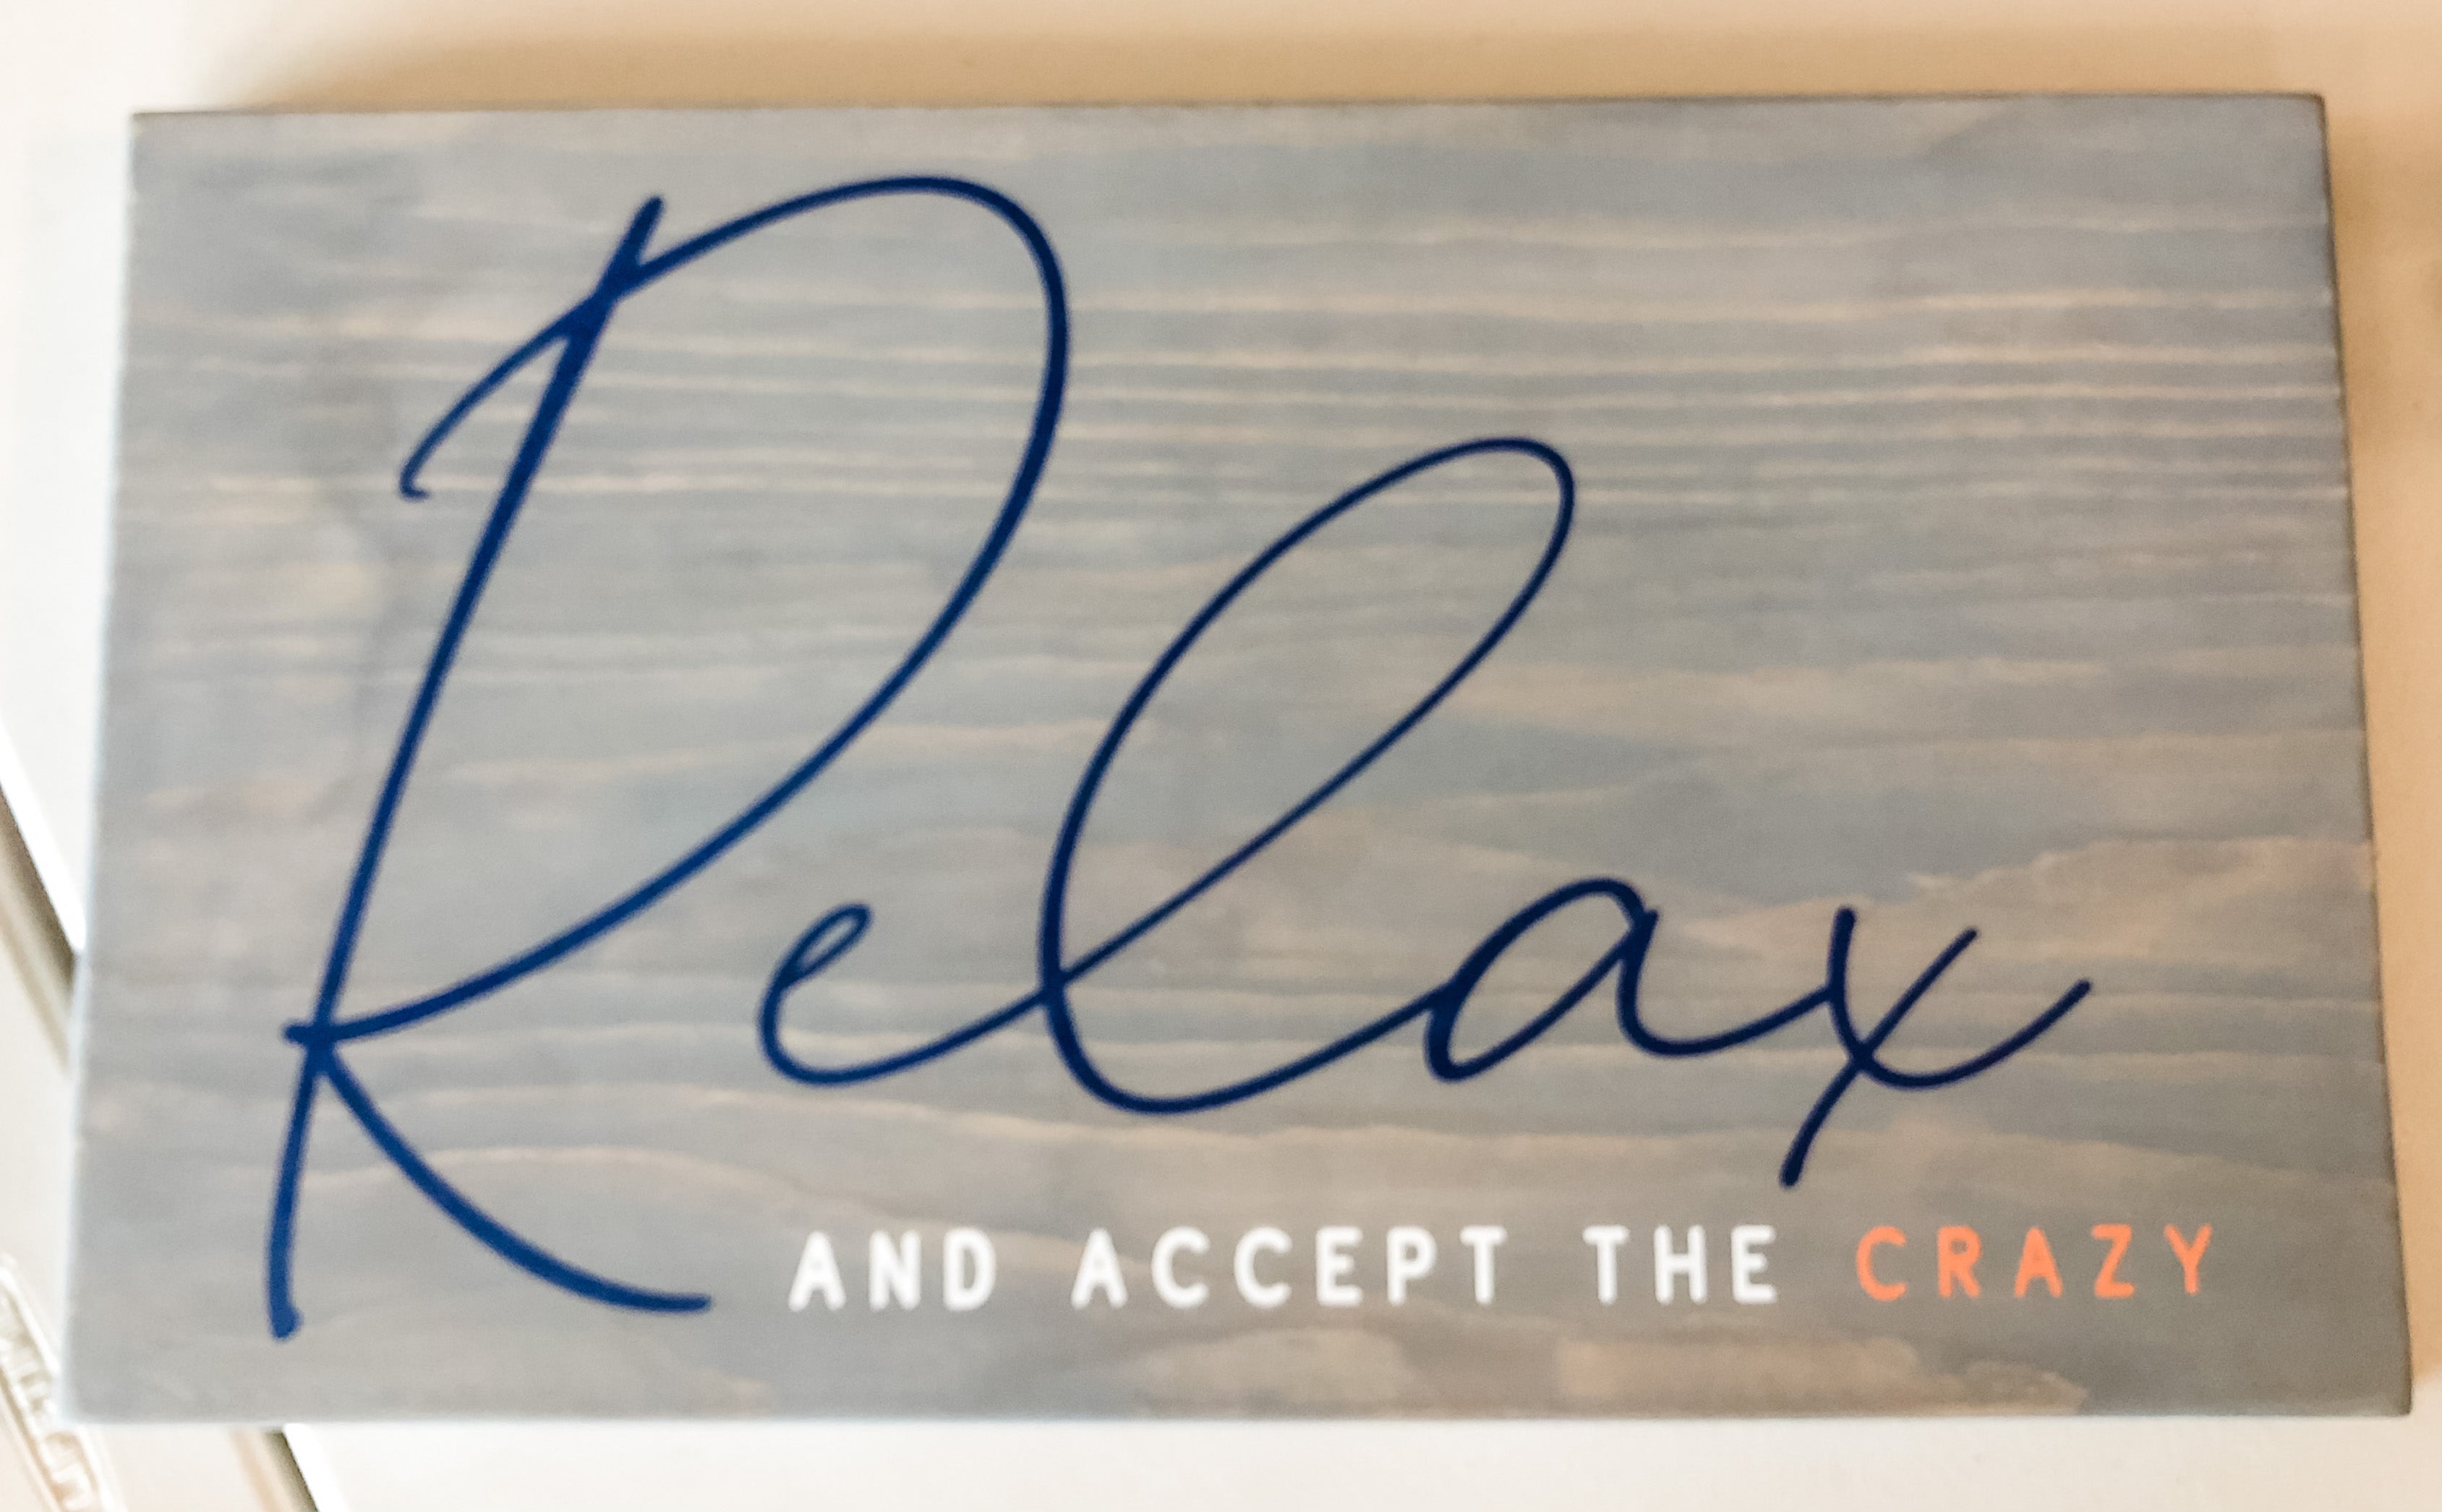 Relax and Accept The Crazy